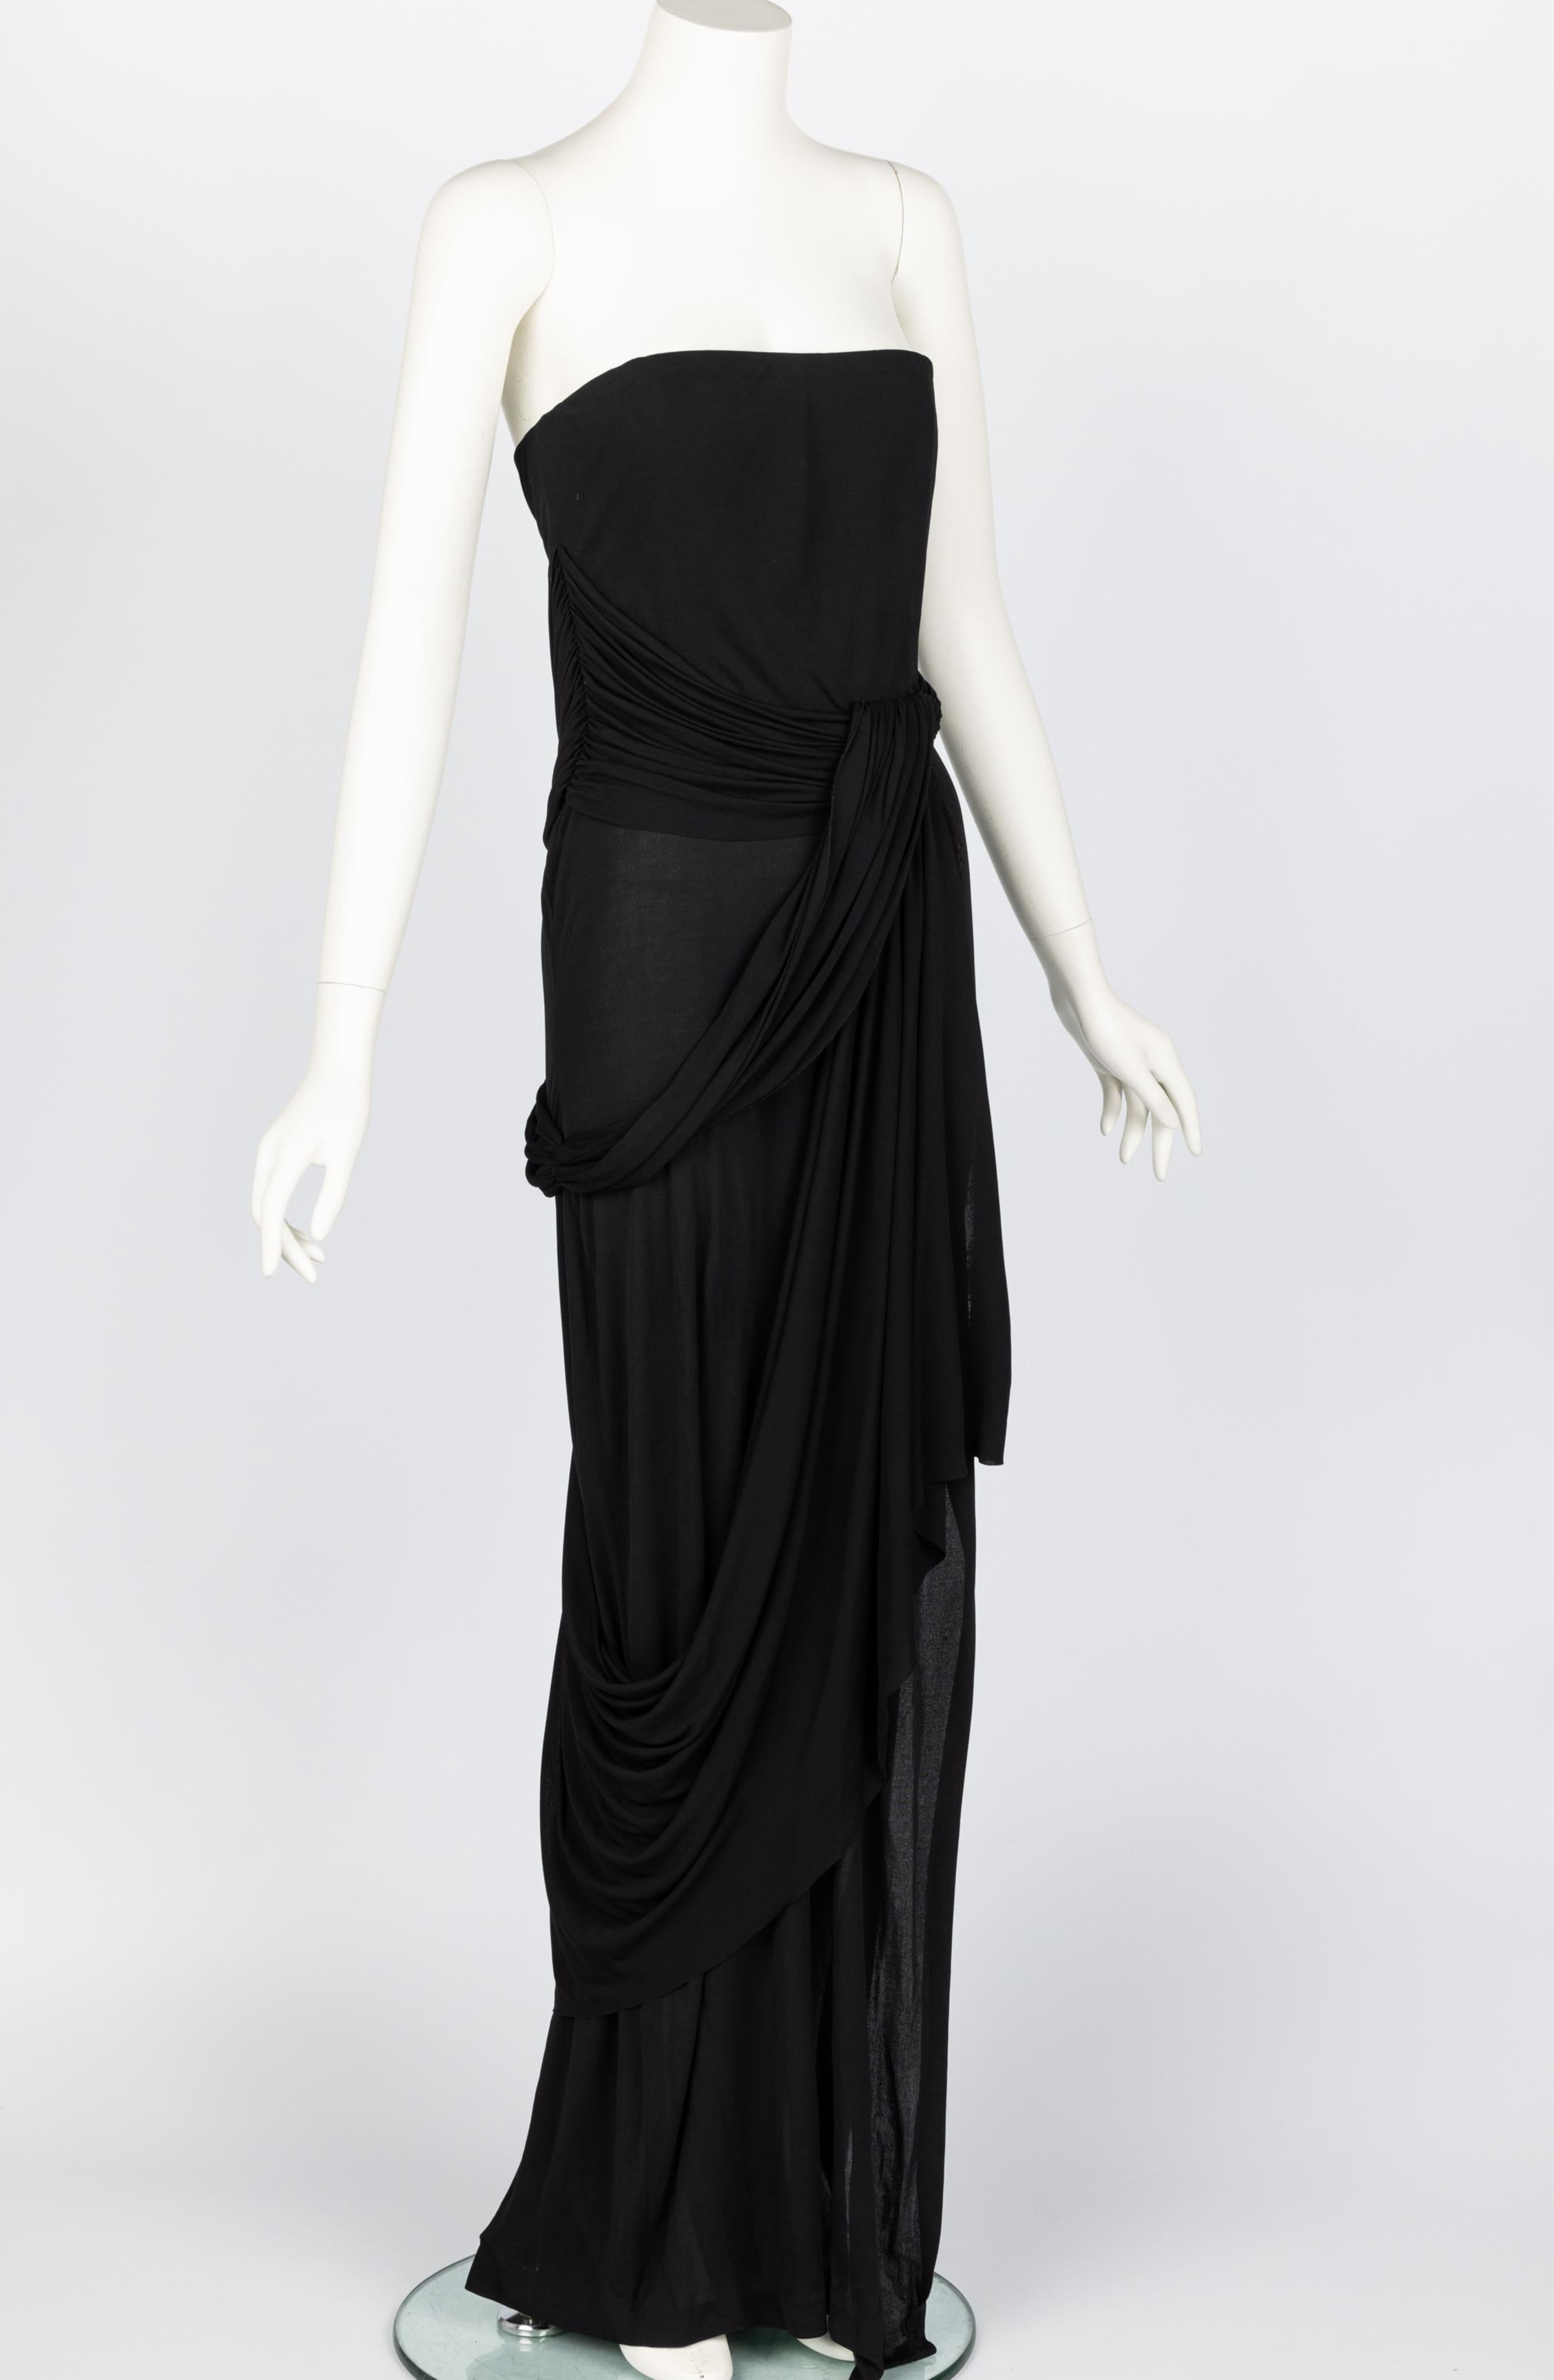 1970s Bill Blass for Bergdorf Goodman evening gown.

Done in an exquisite black fabric, that drapes beautifully. 
The bodice is boned.
concealed back zip closure.
Excellent condition, tiny mark on the bust.

No size label, please see